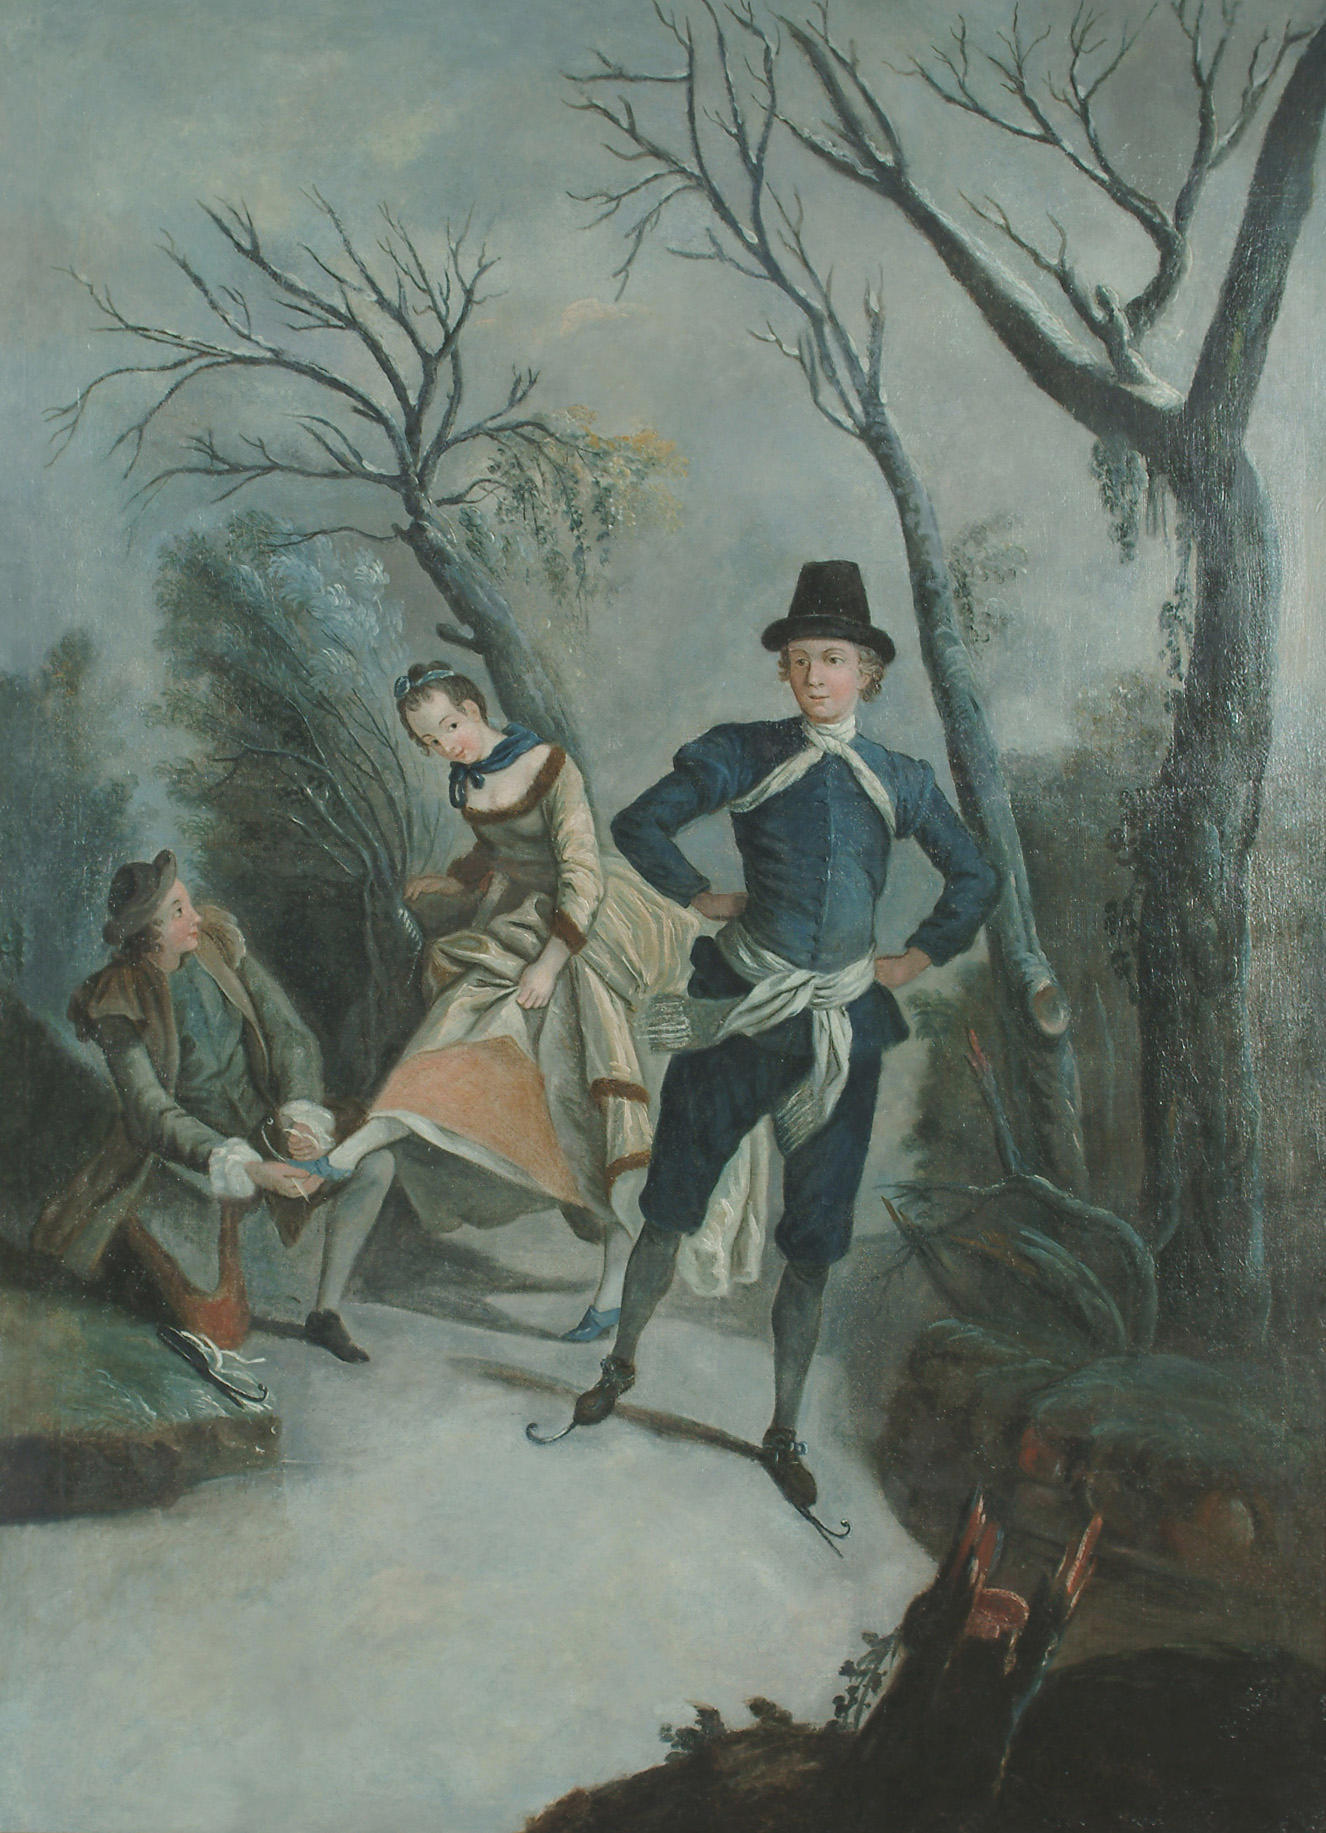 Unknown Artist, French - Winter Intrigue, 18th Century